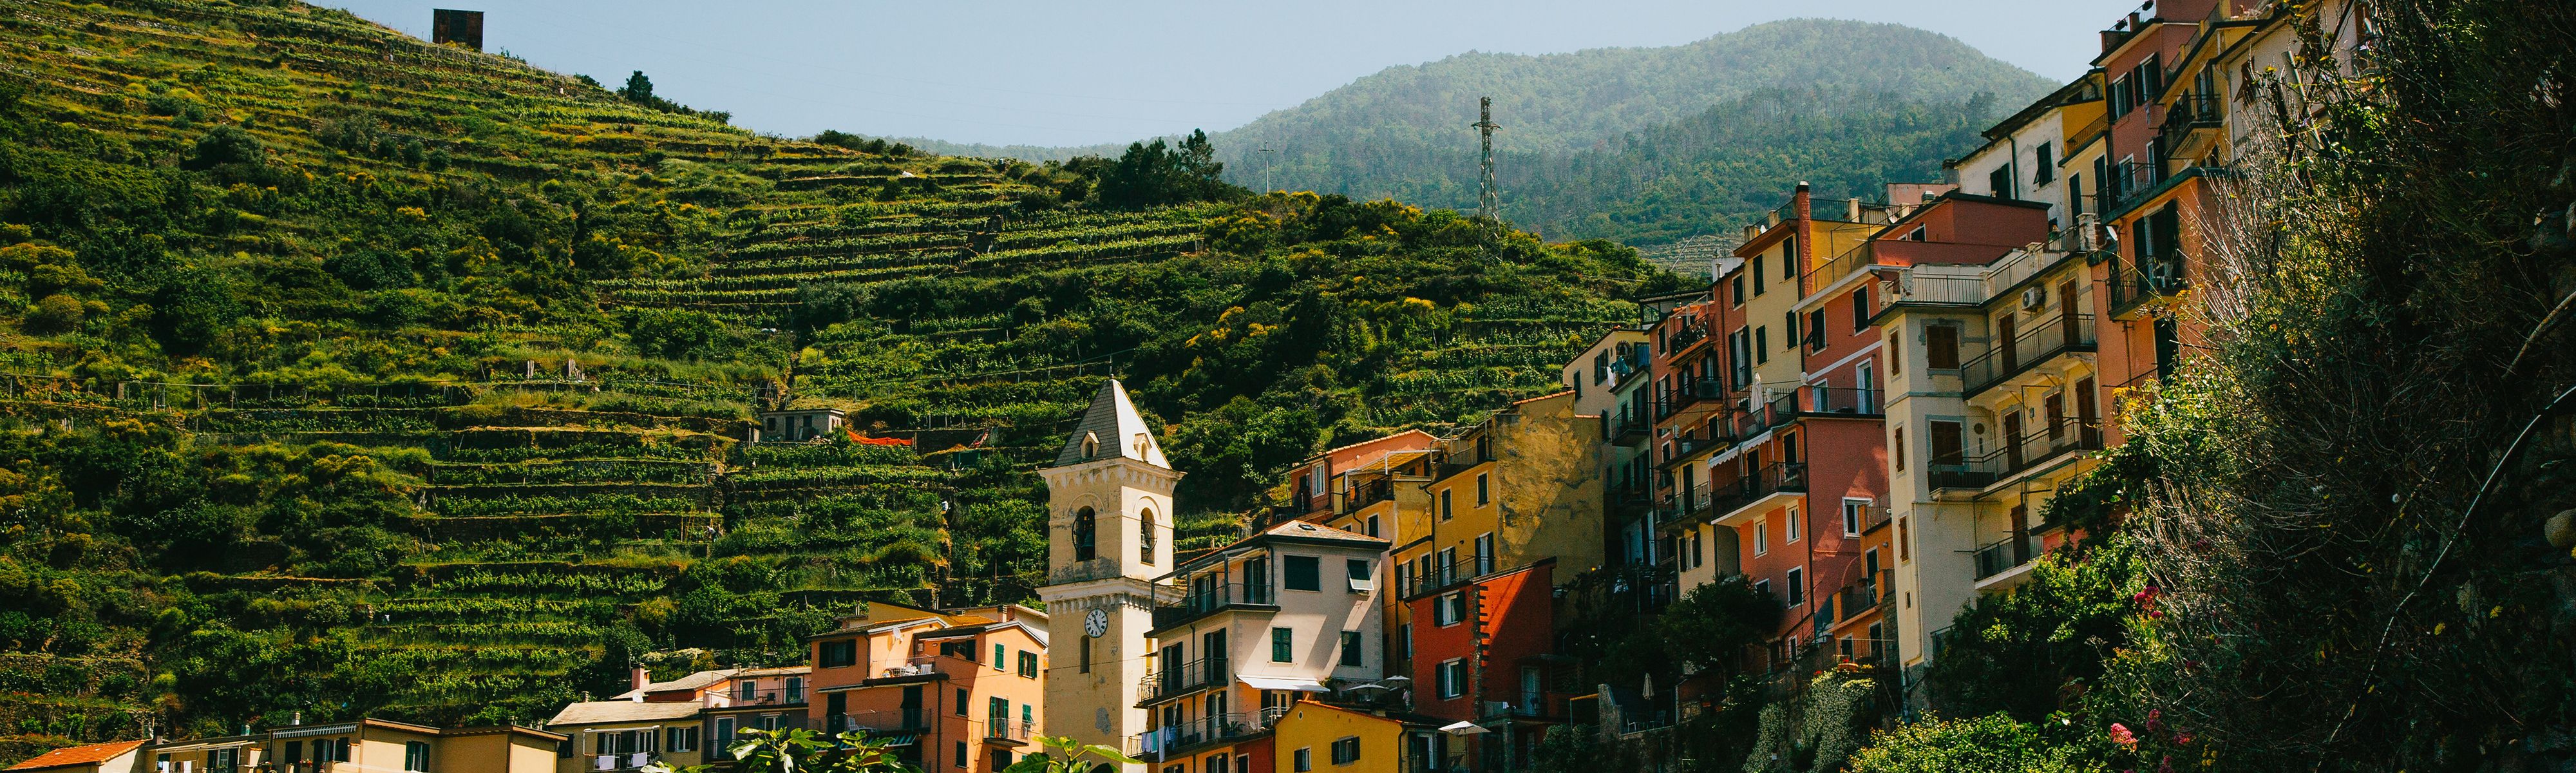 red and tan buildings along the cliffs in cinque terre italy